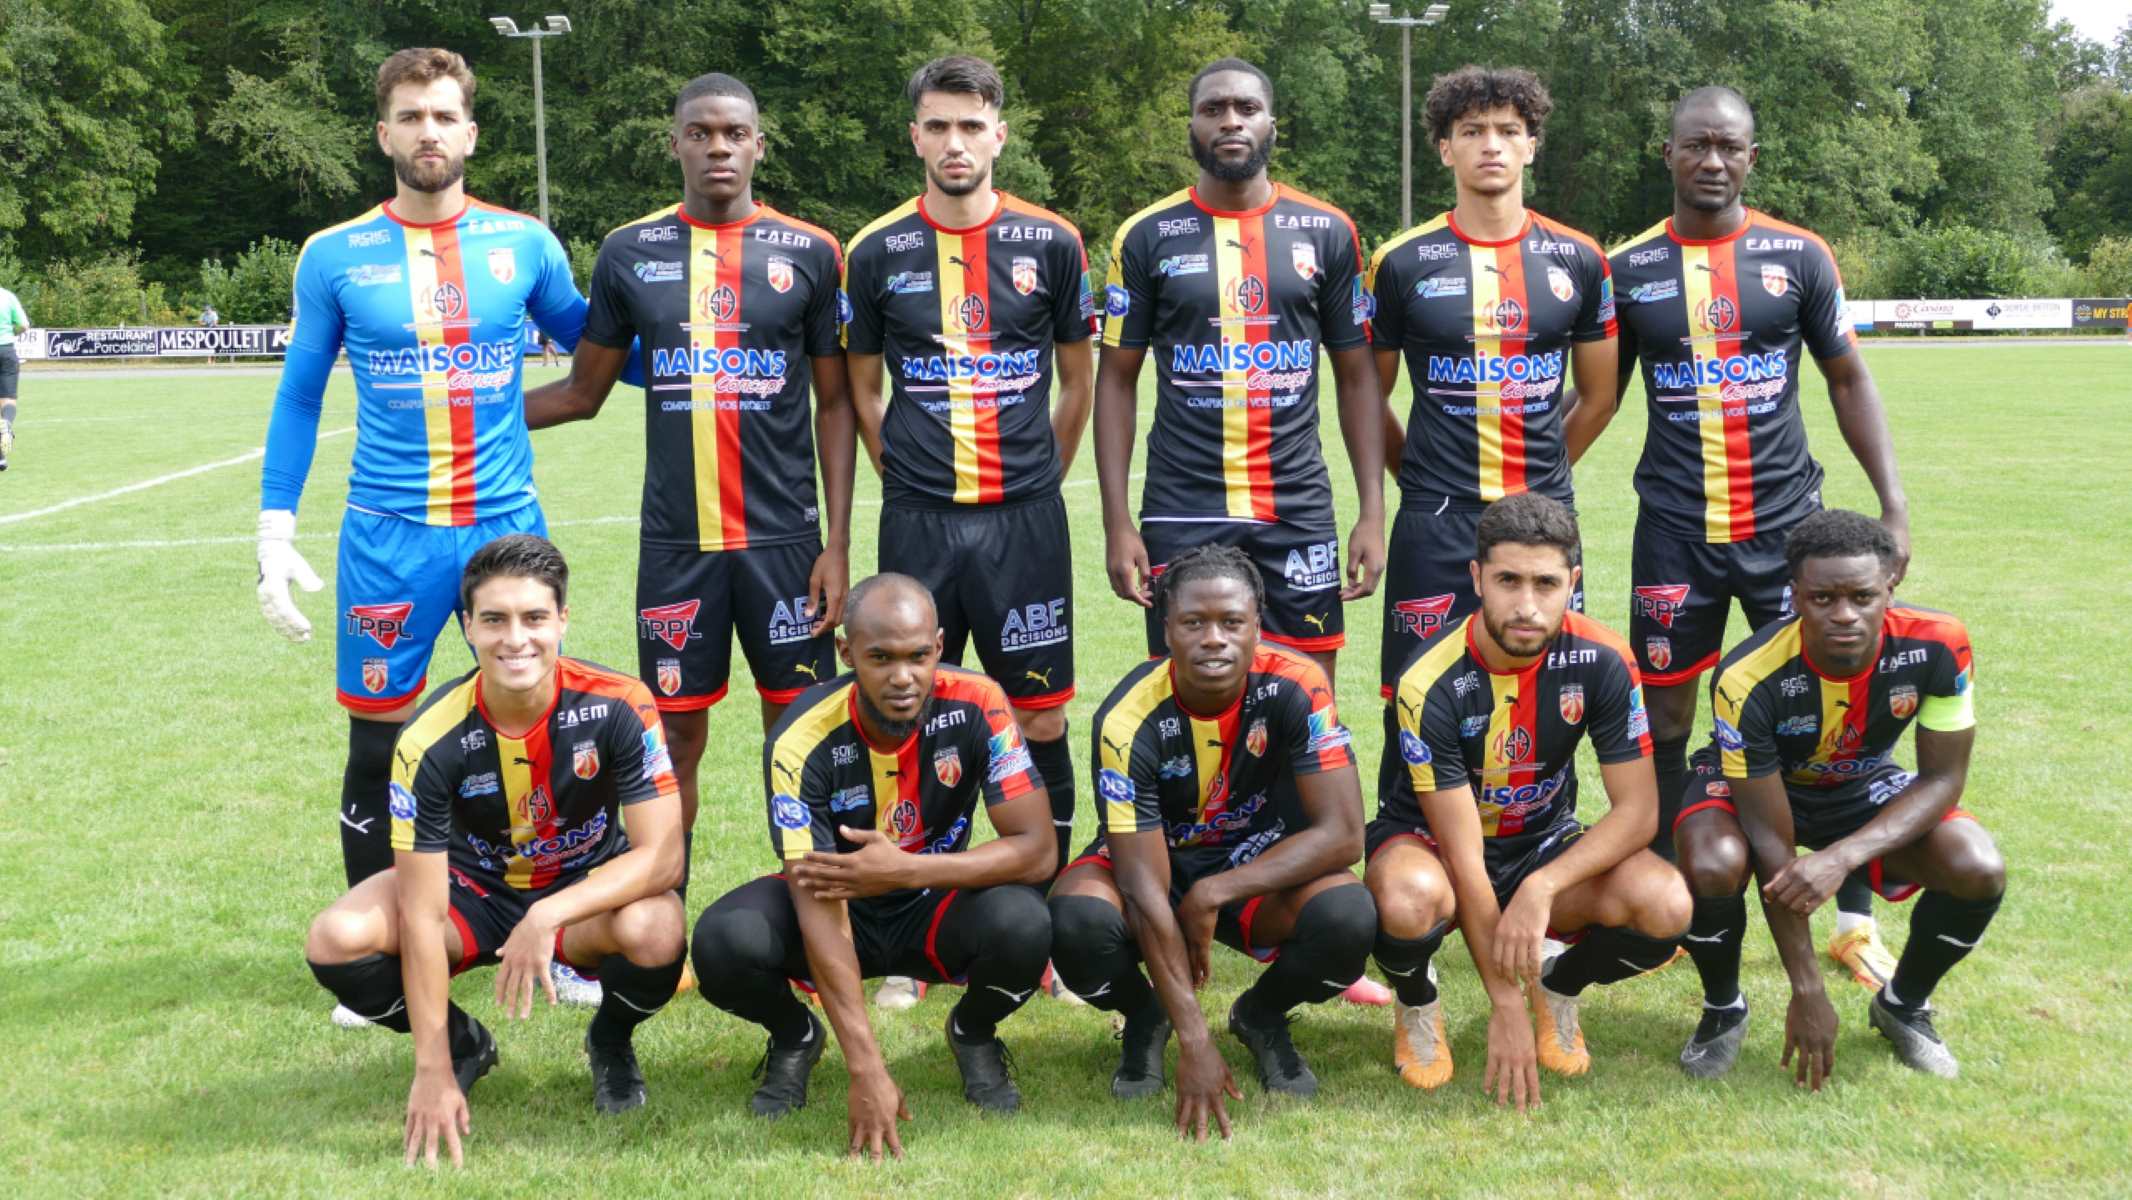 fc-ouest-tourangeau-11-football-club-facts